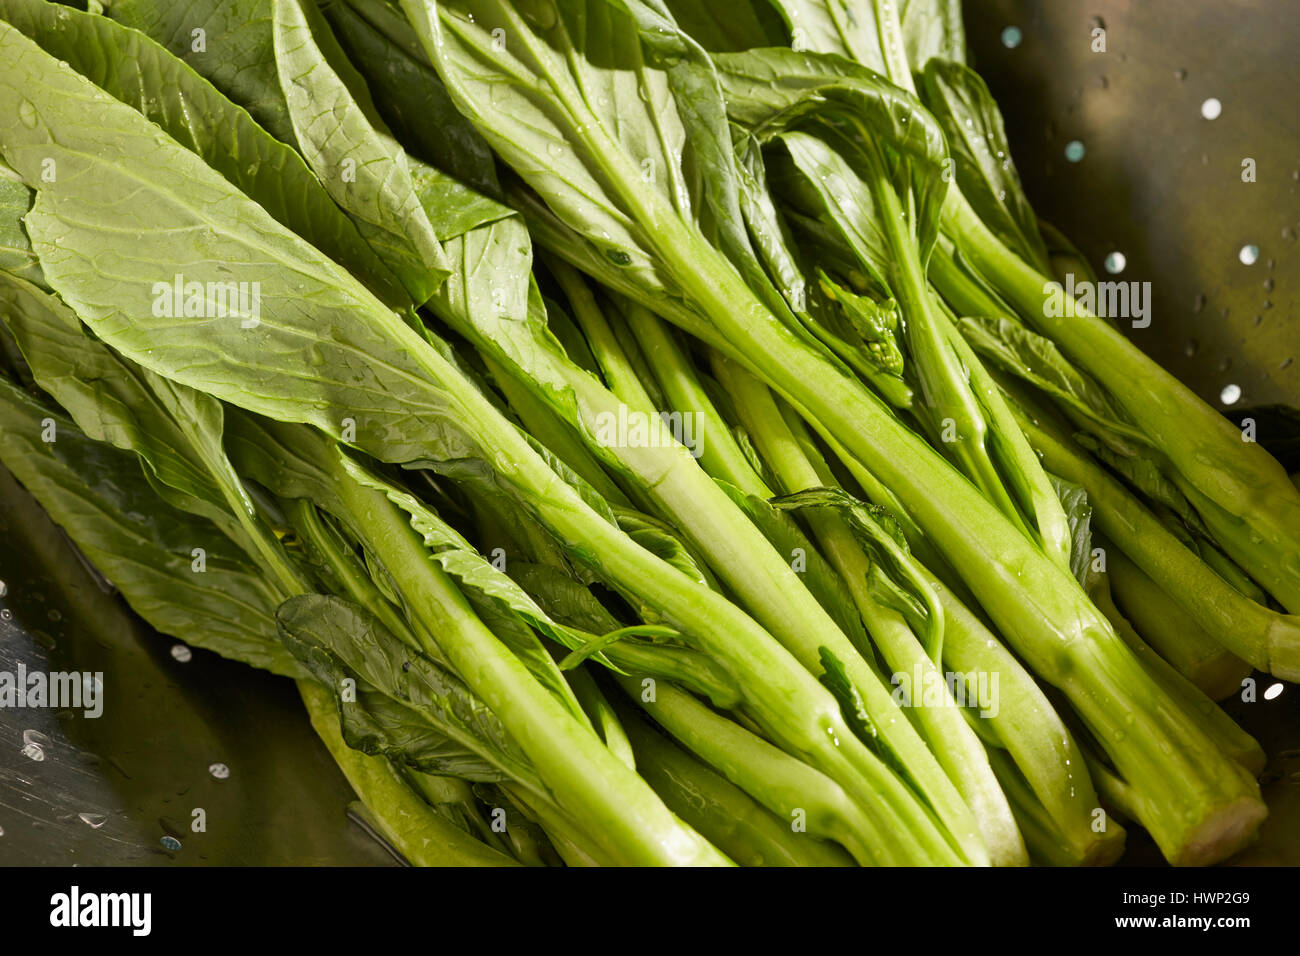 fresh, raw, Chinese Broccoli, vegetable, China, Asia, cooking, ingredient, cookery, cuisine, food, veg, veggies, healthy, natural Stock Photo